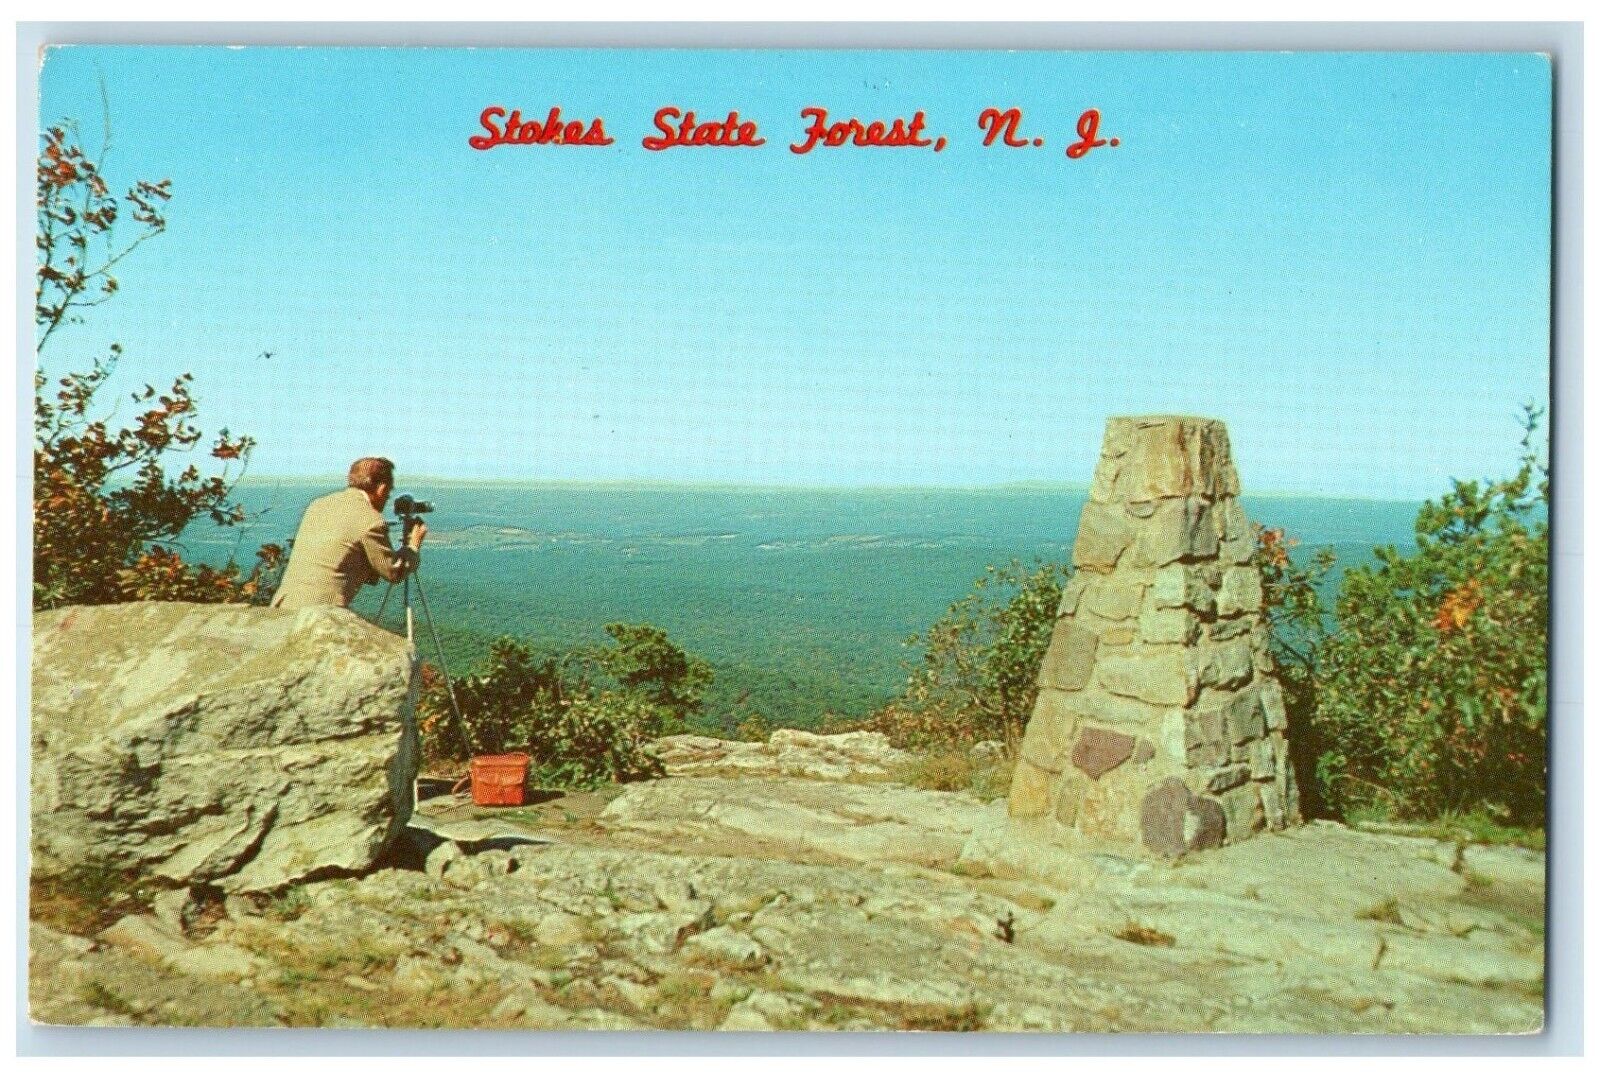 c1960 View Looking West Stokes State Forest New Jersey Antique Vintage Postcard